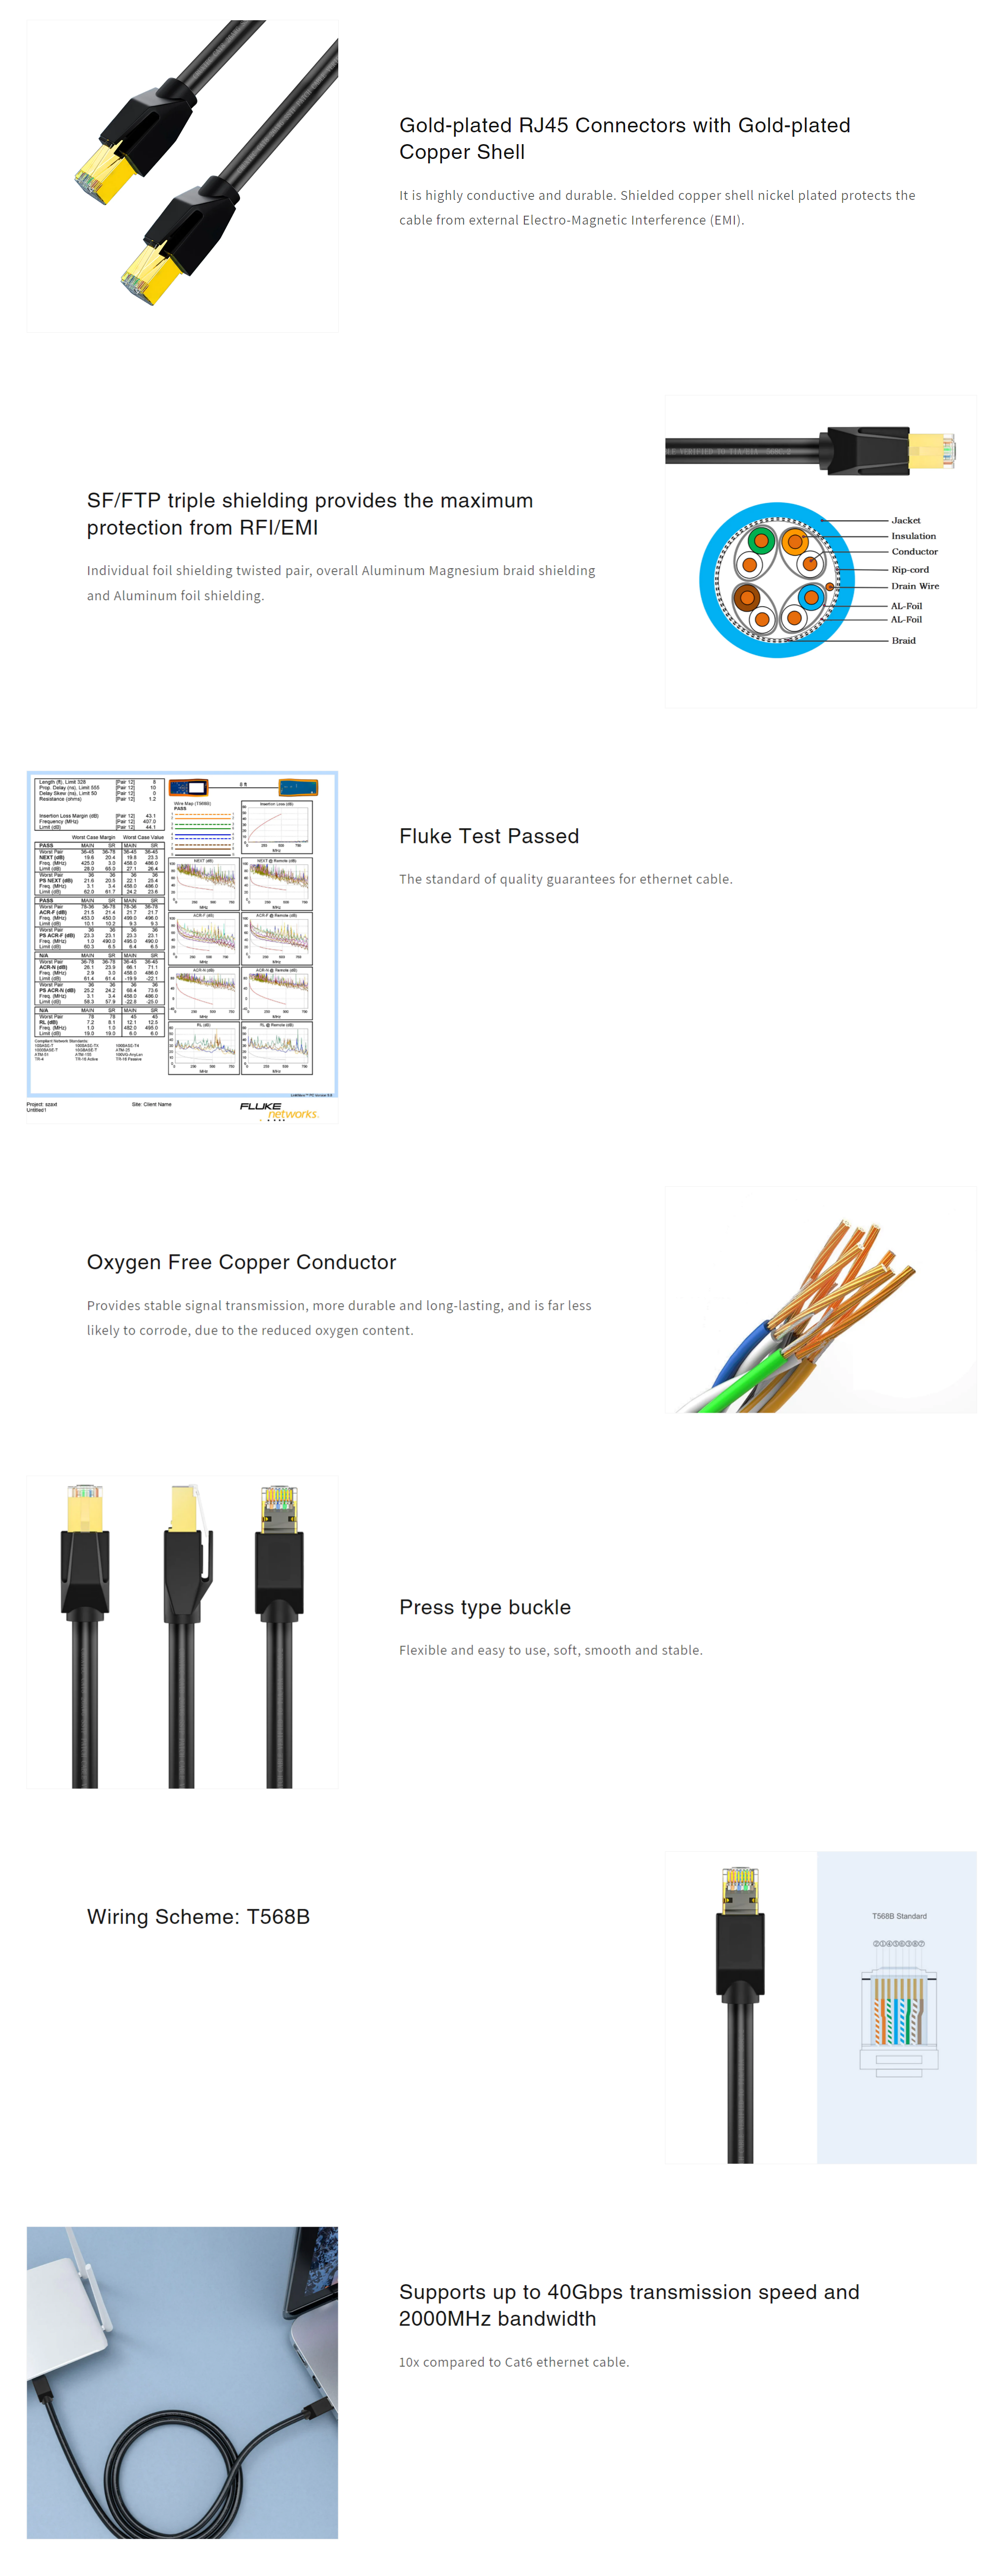 A large marketing image providing additional information about the product Cruxtec CAT8 3m 40GbE SF/FTP Triple Shielding Ethernet Cable Black - Additional alt info not provided